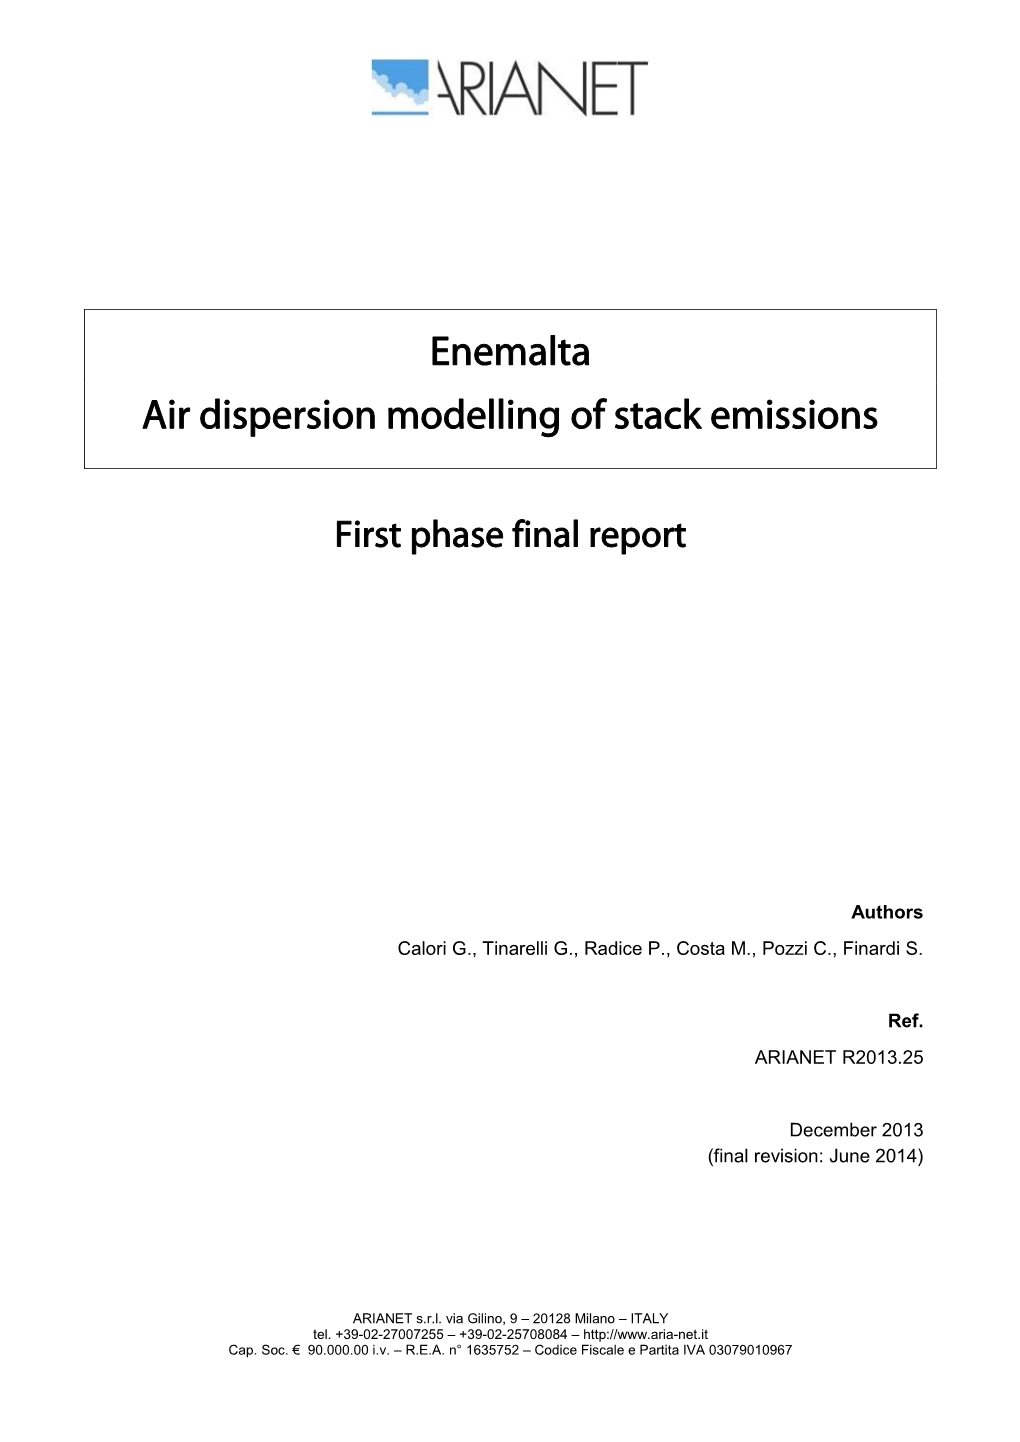 Air Dispersion Modelling of Stack Emissions